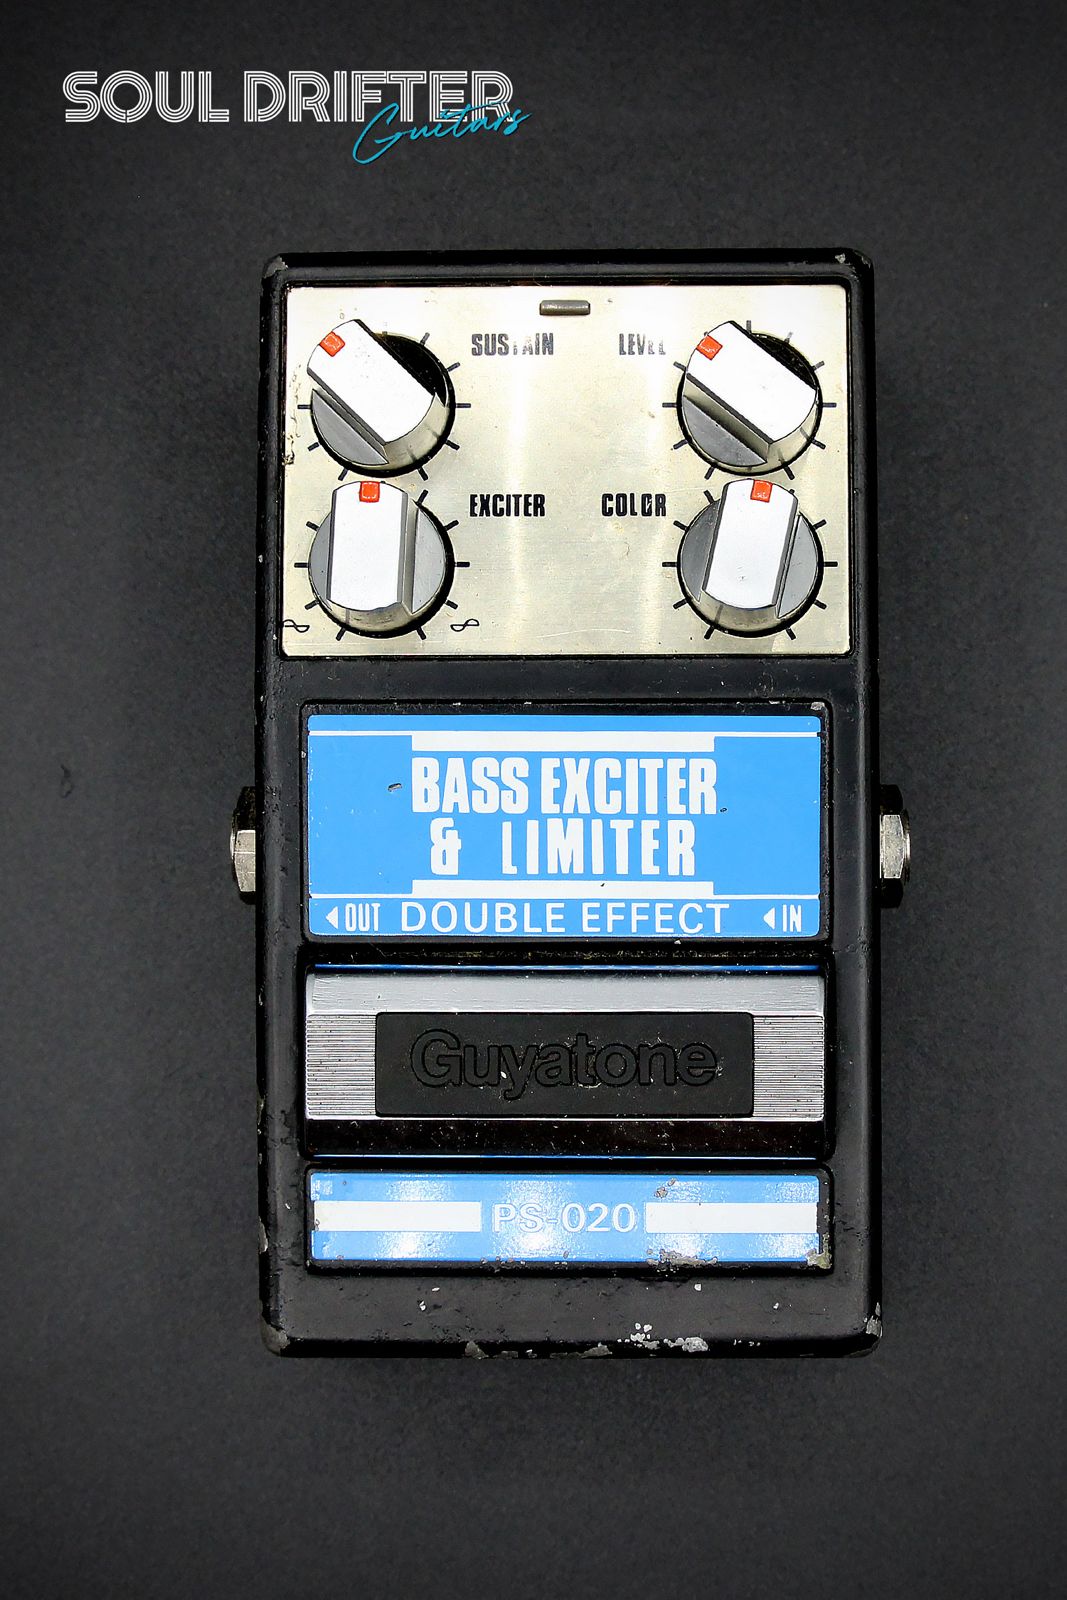 Guyatone PS-020 Bass Exciter & Limiter